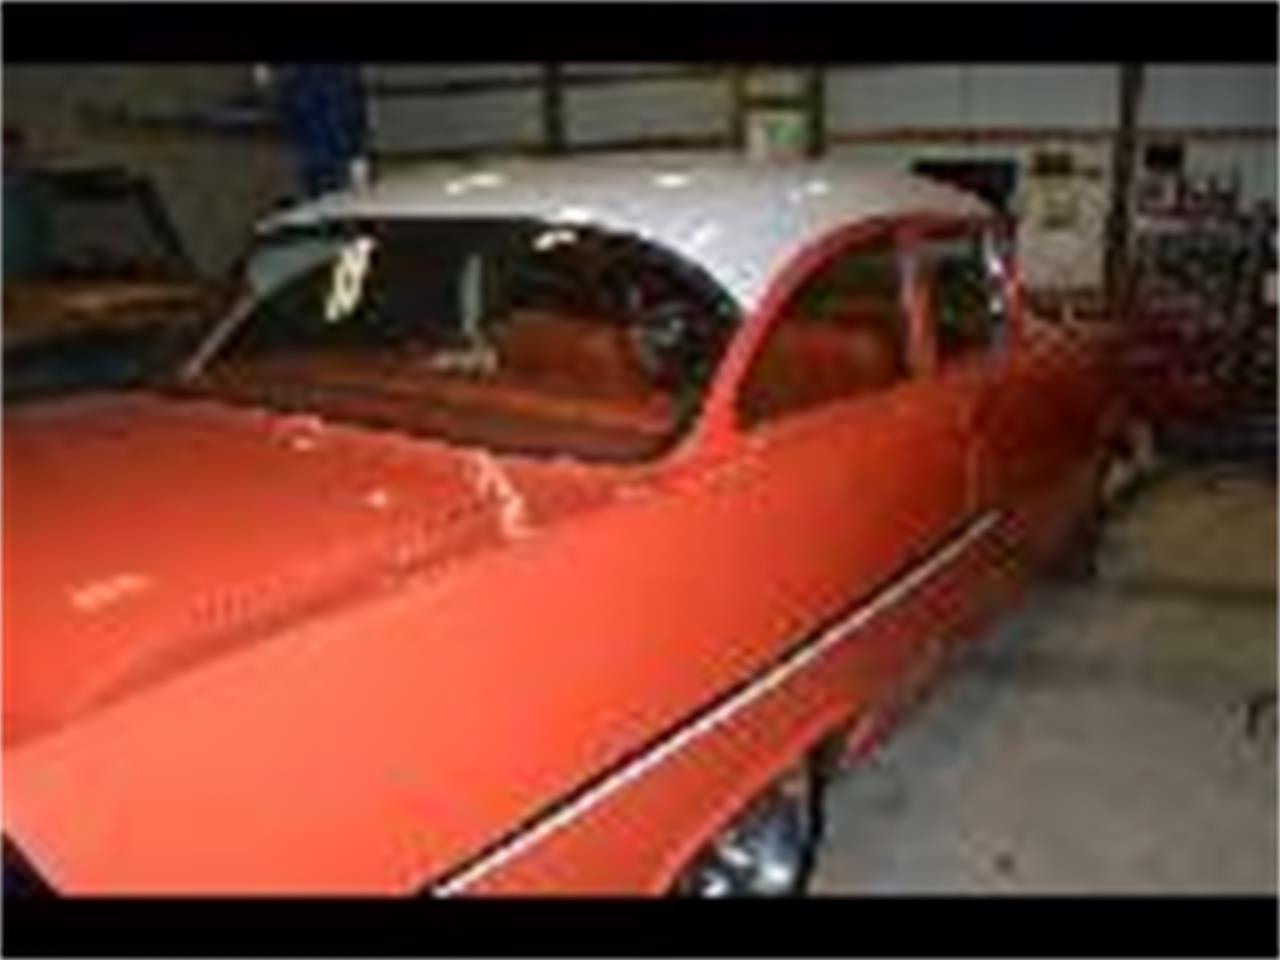 1955 Chevrolet Bel Air for sale in Cadillac, MI – photo 2